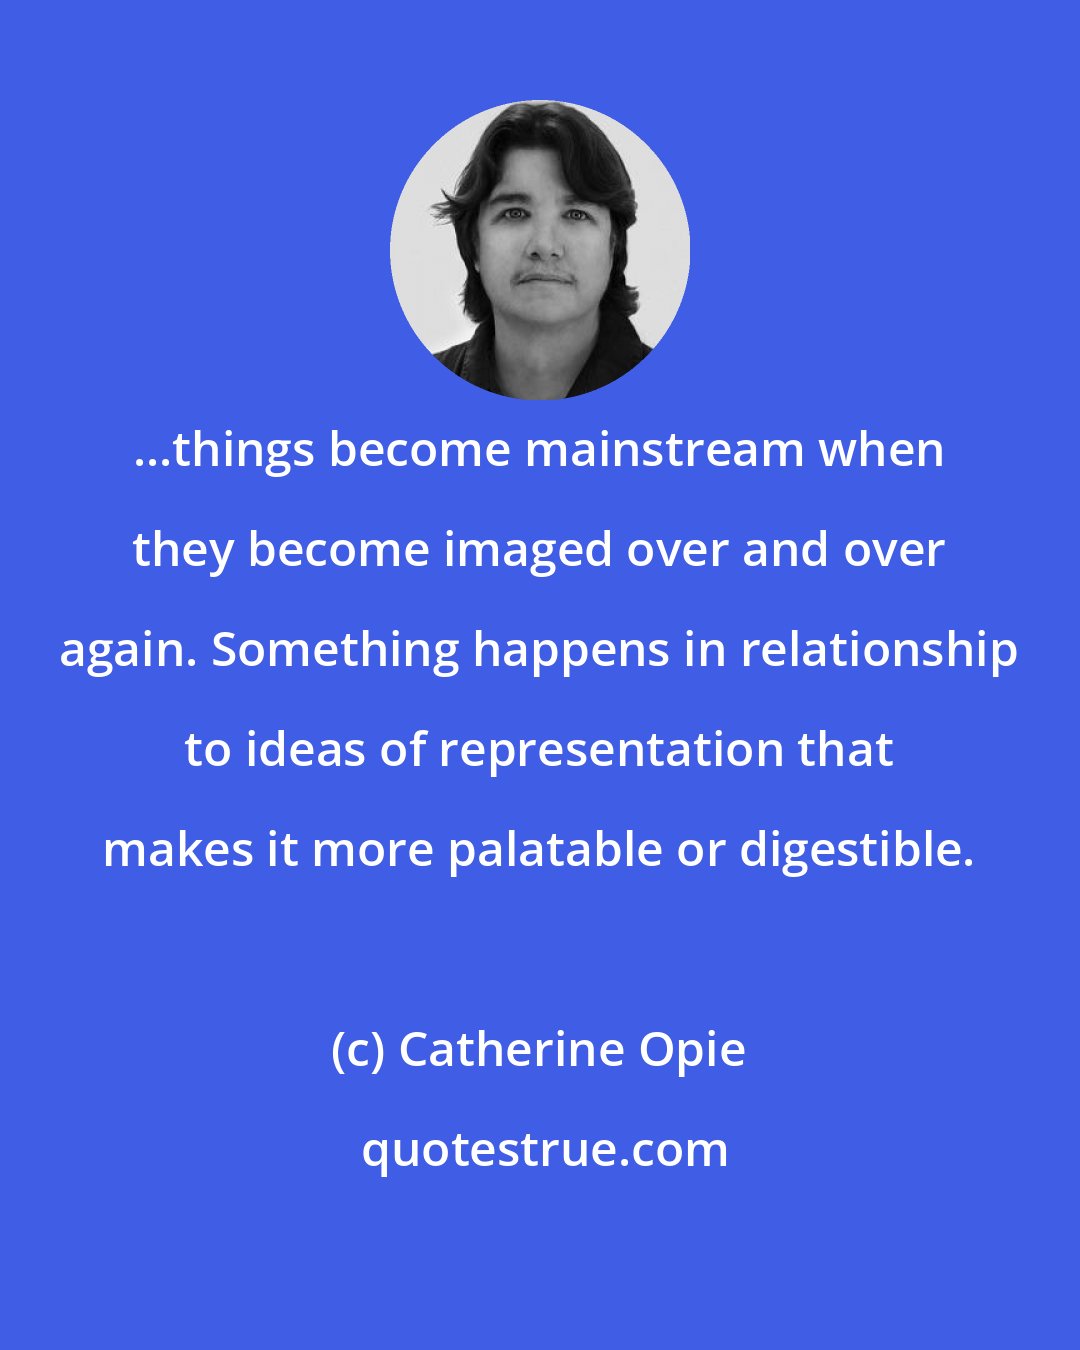 Catherine Opie: ...things become mainstream when they become imaged over and over again. Something happens in relationship to ideas of representation that makes it more palatable or digestible.